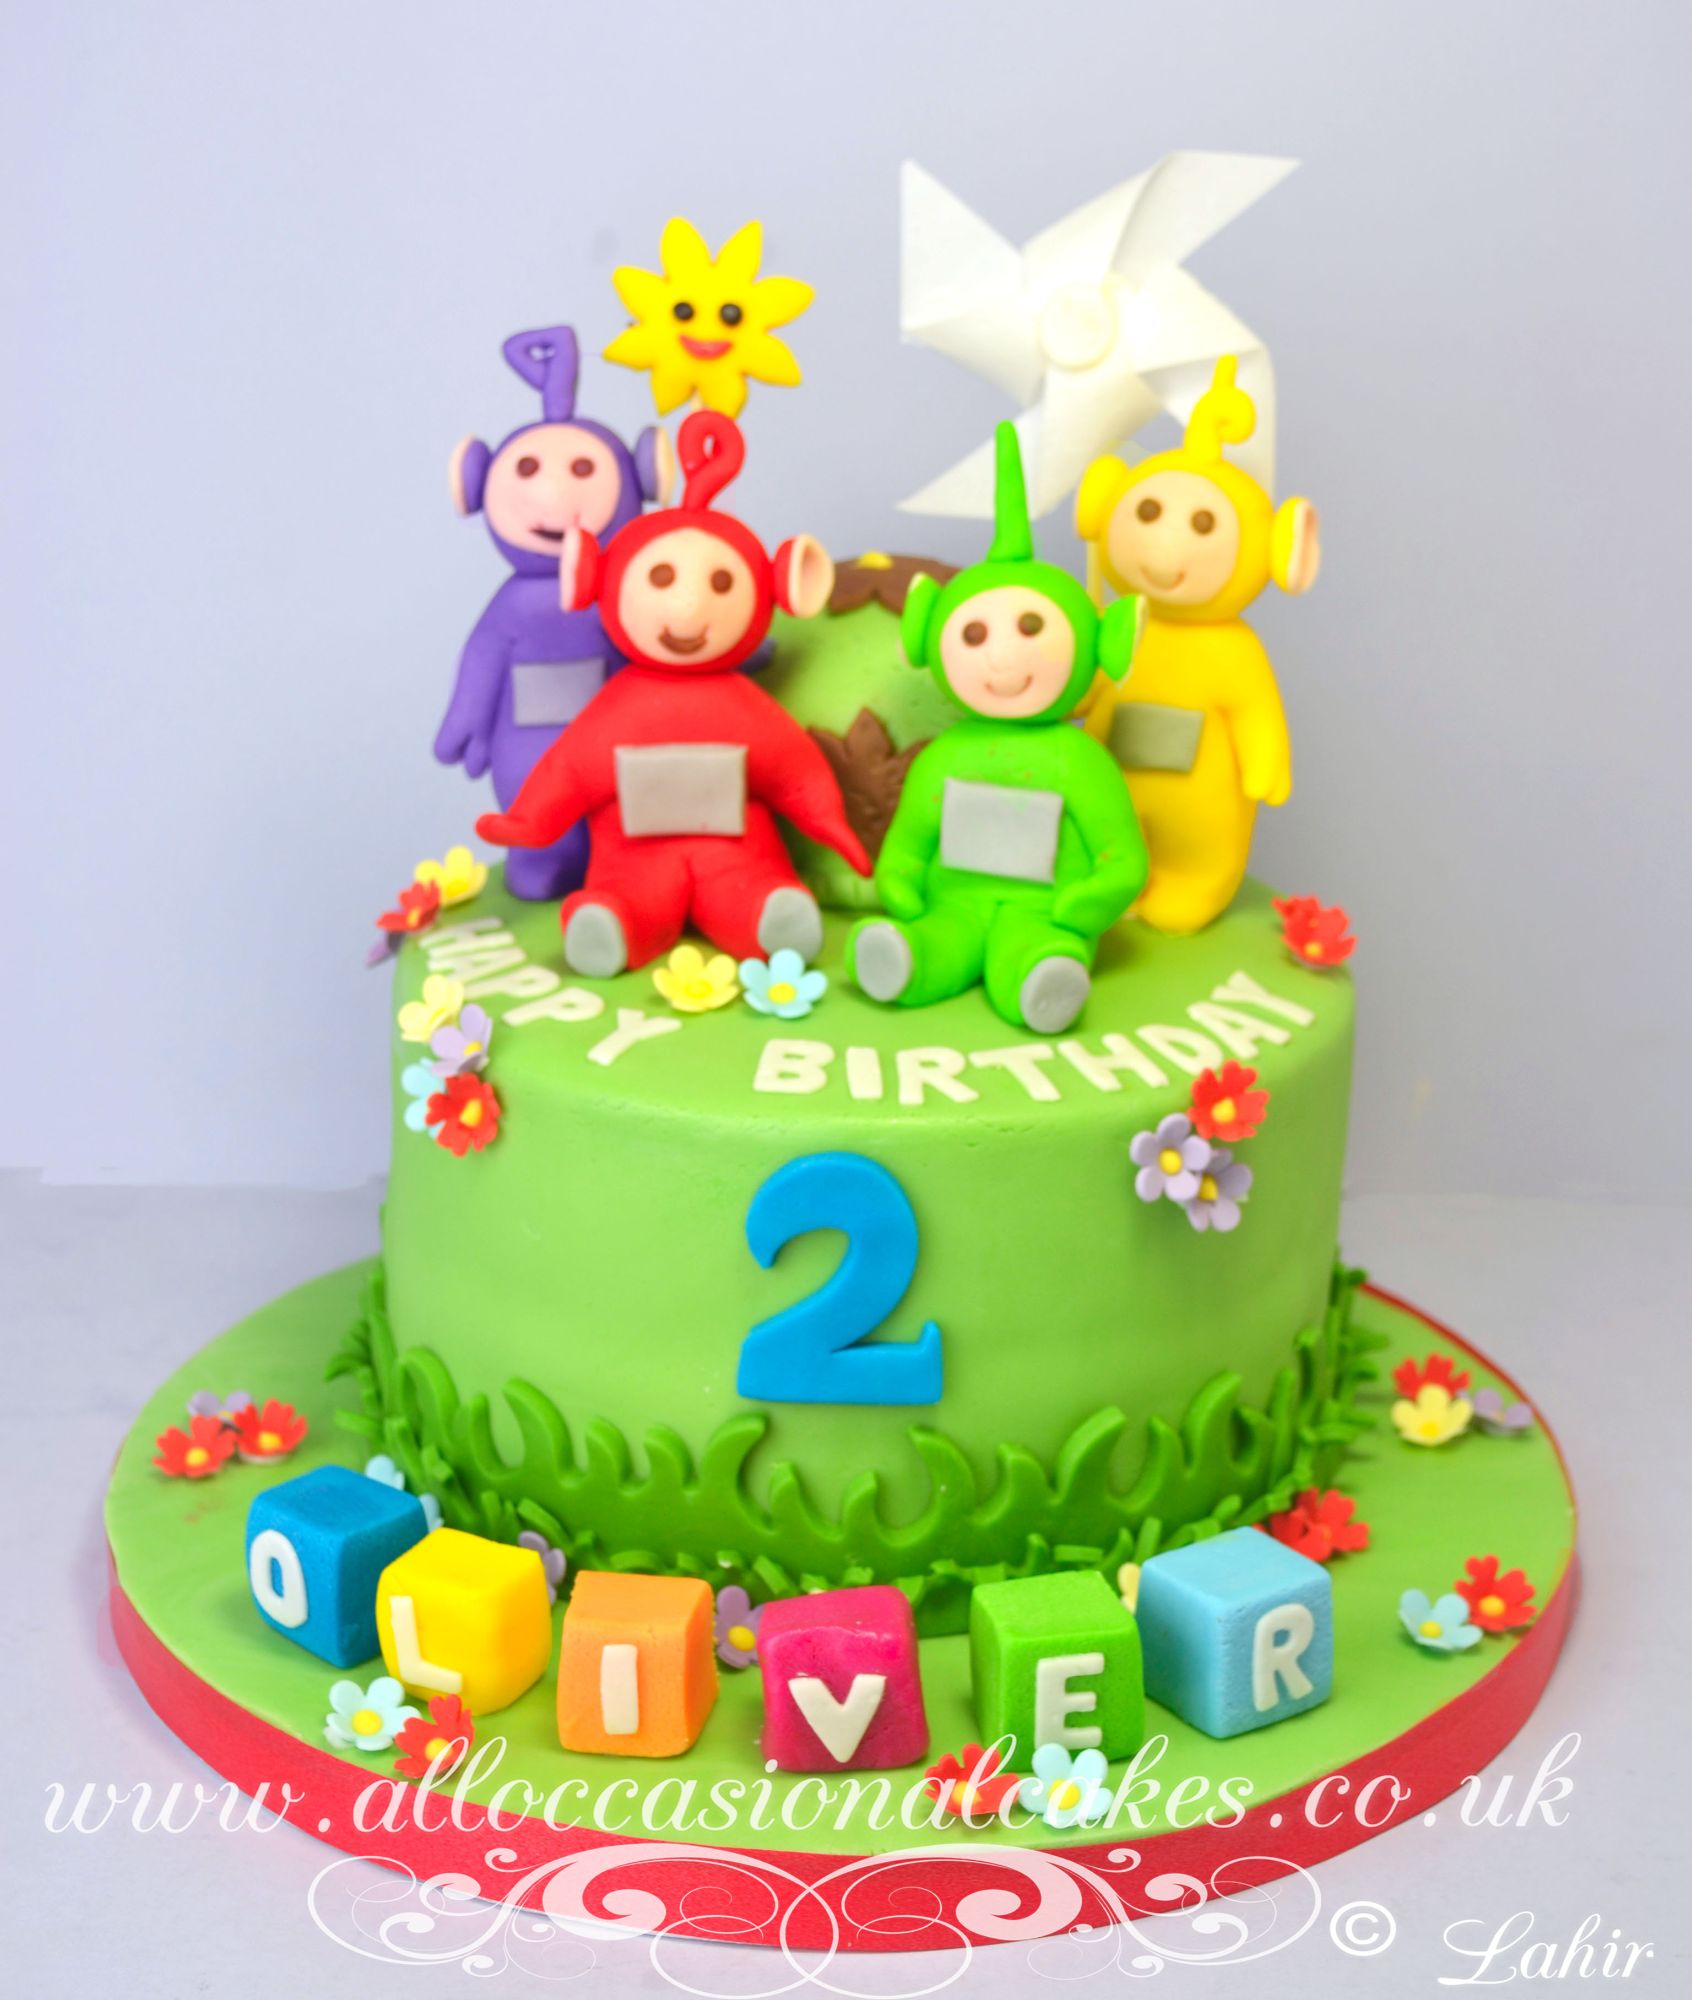 Teletubbies cake | 3 A's creation cakes